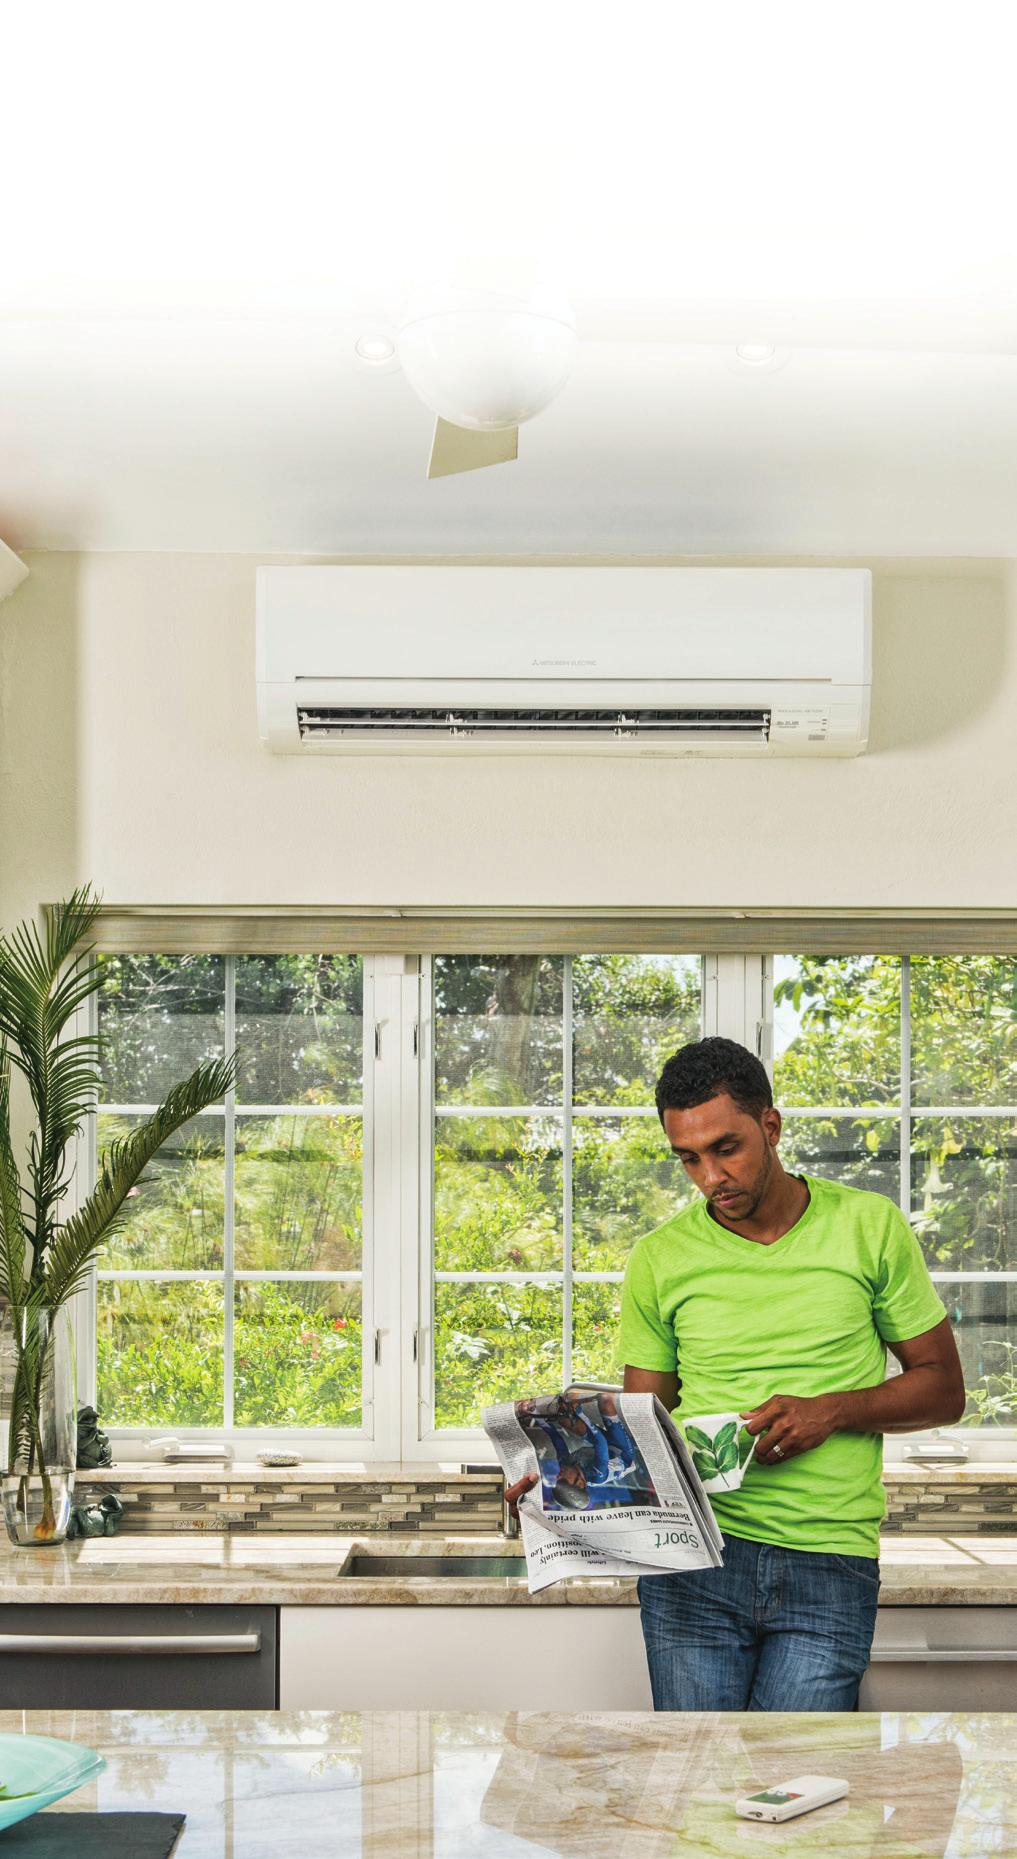 Ductless is the perfect solution for new additions, for renovated bedrooms and office spaces, for garage and basement workshops or studios.